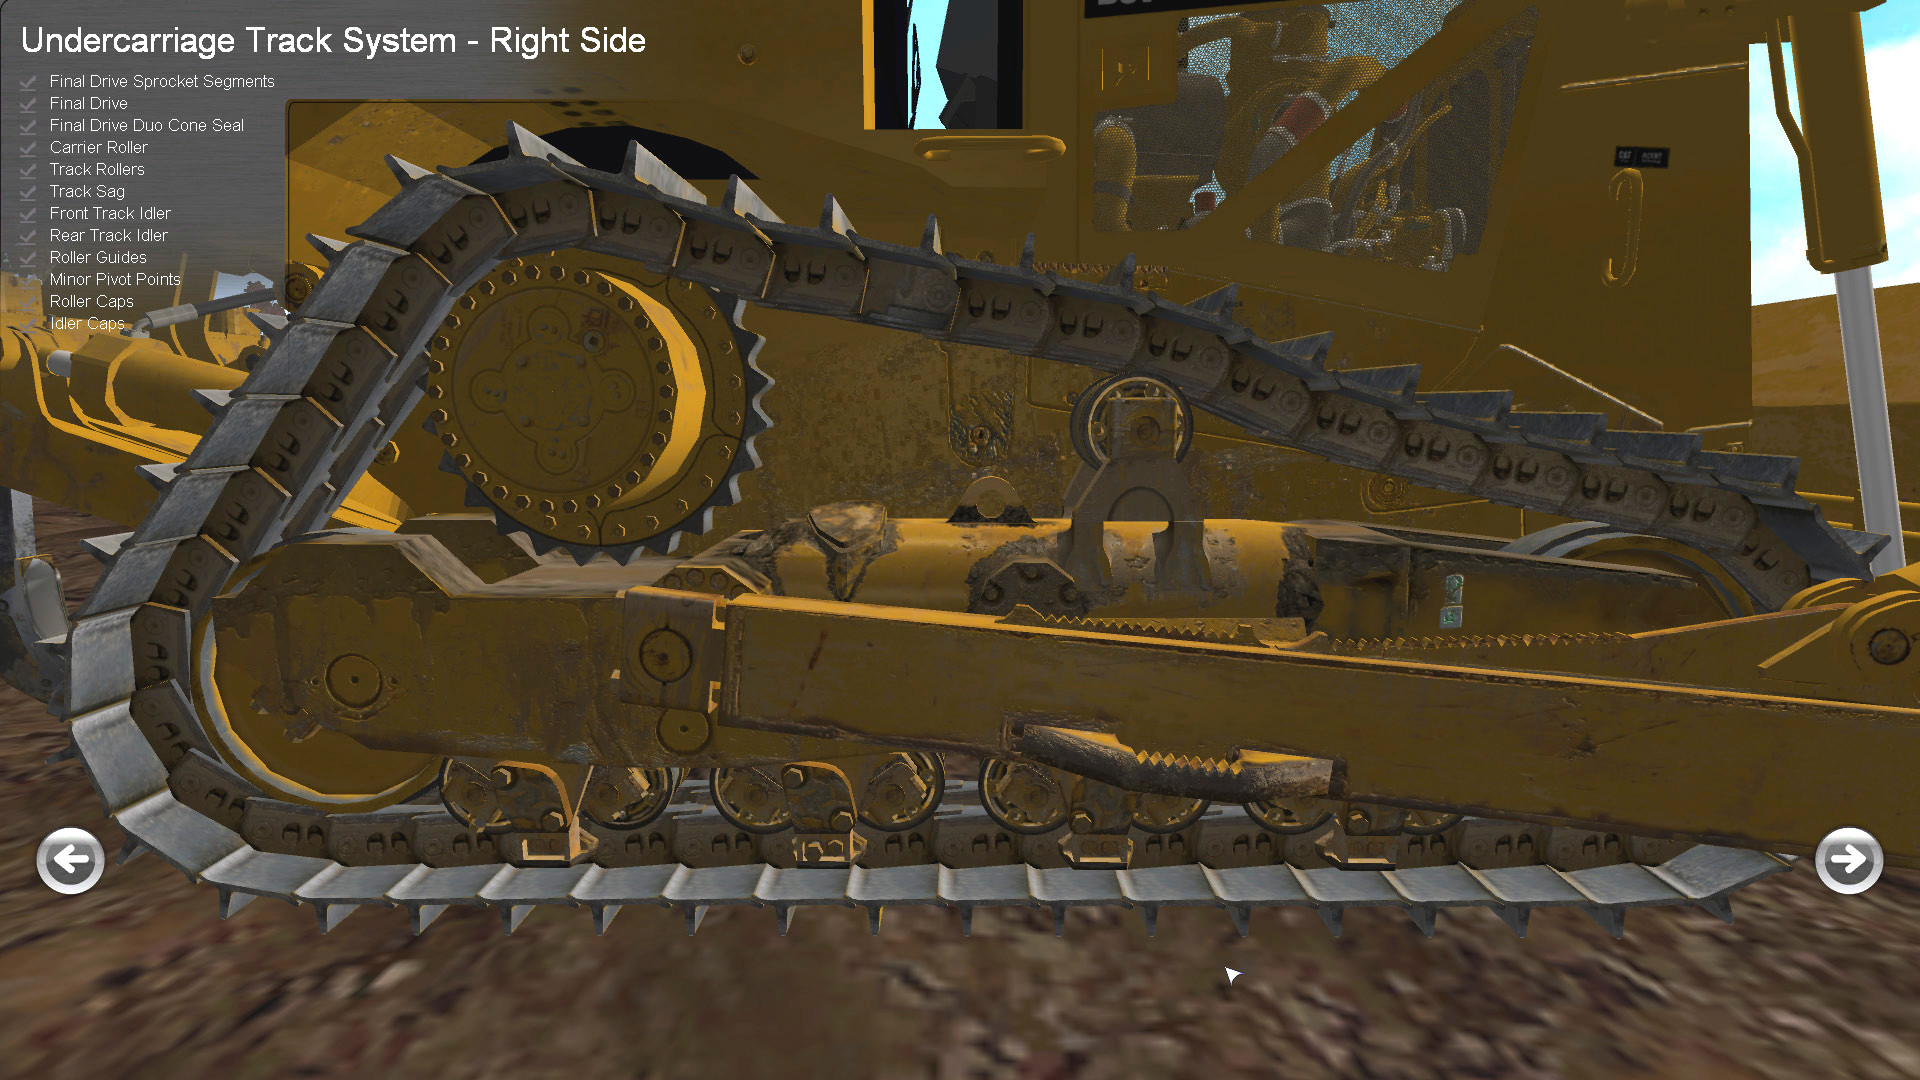 1920x1080 Caterpillar is now offering simulation software to train heavy equipment  operators